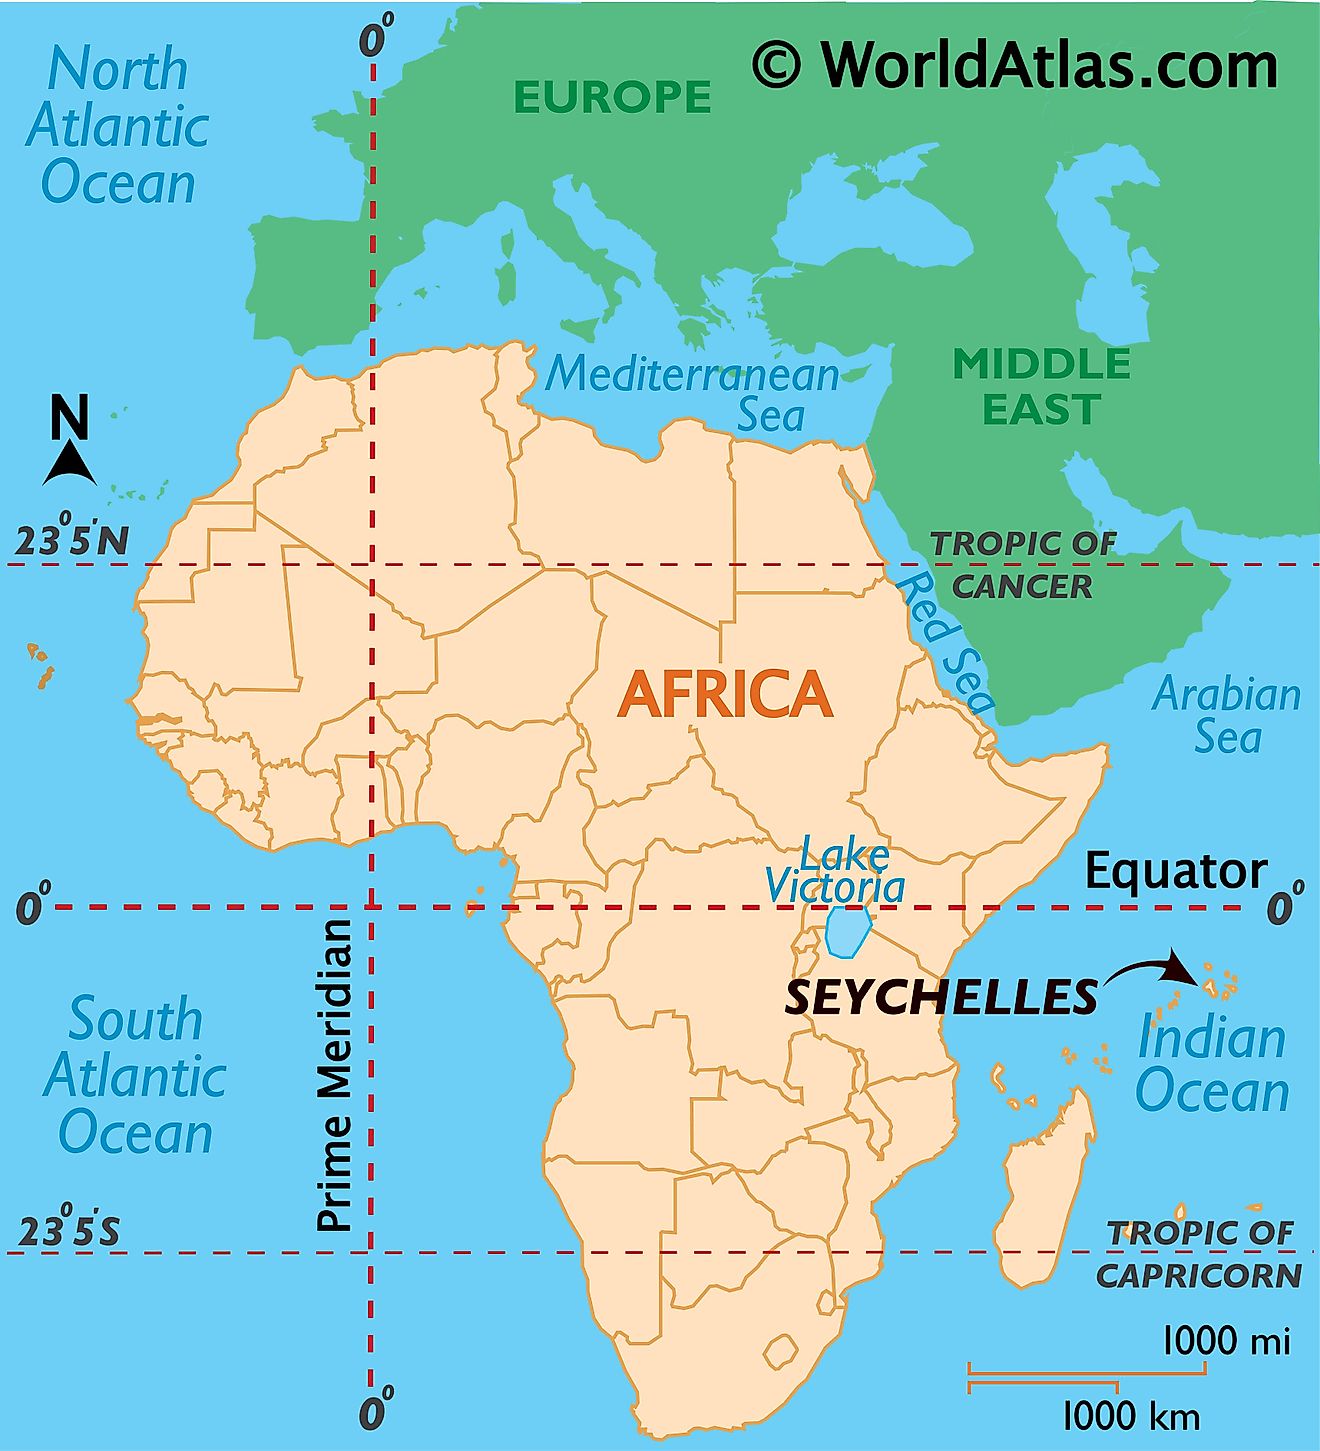 Victoria, Seychelles, Map, Population, & Facts